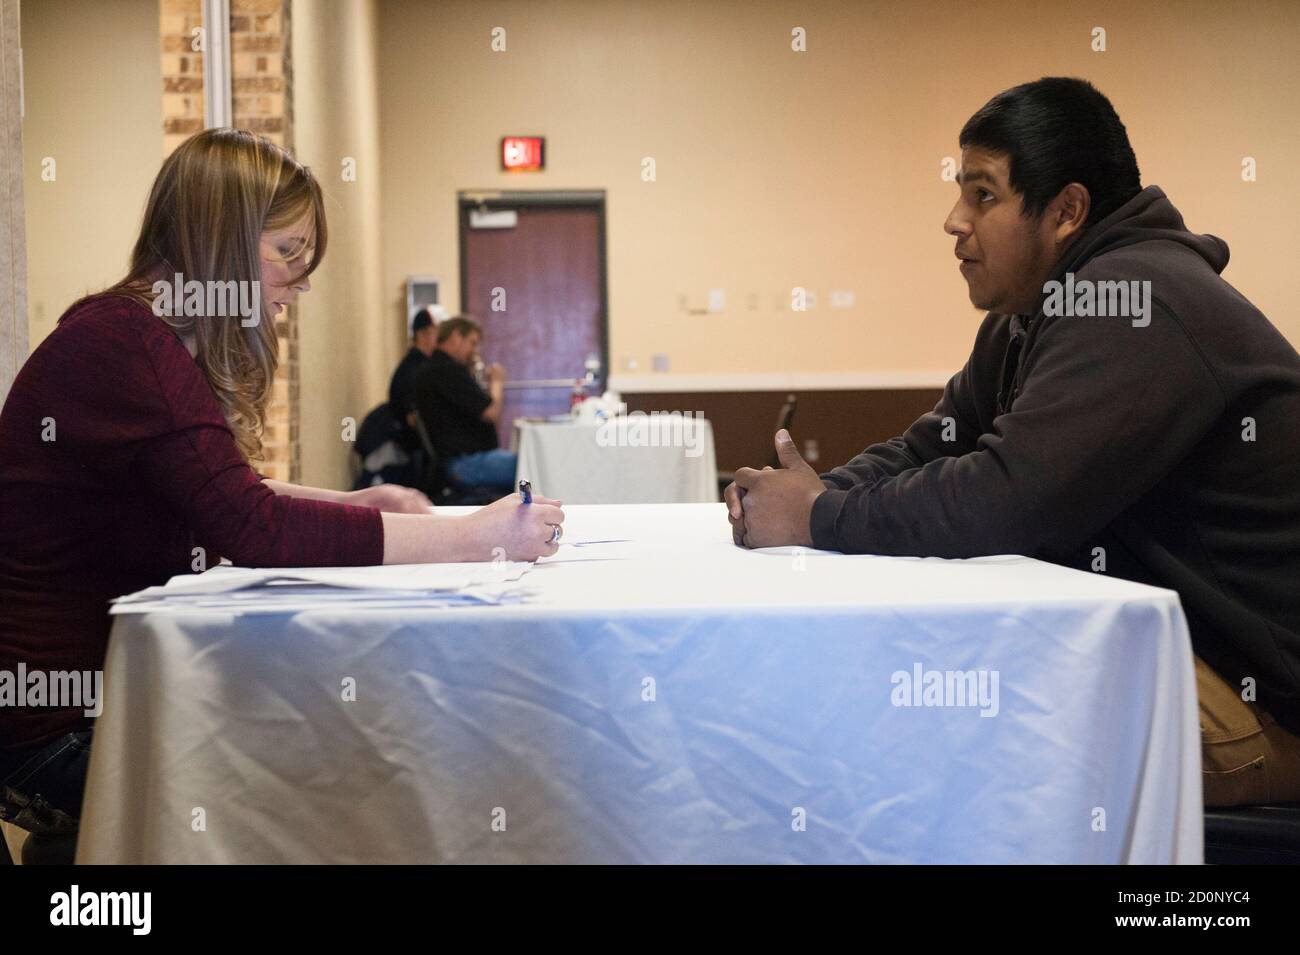 Bazileo Hernandez (R) talks to a recruiter at a hiring event hosted at a local hotel by the oilfield services company RockWater Energy Solutions in Williston, North Dakota January 22, 2015. After a week in Williston, Hernandez and his friends were still looking for steady work. Like so many before them, Terra Green, Jeff Williamson and Bazileo Hernandez came to North Dakota's oil country seeking a better life. They just came too late. Itinerant, unskilled workers could as recently as last spring show up in the No. 2 U.S. oil producing state and vie for salaries north of $100,000 per year with  Stock Photo